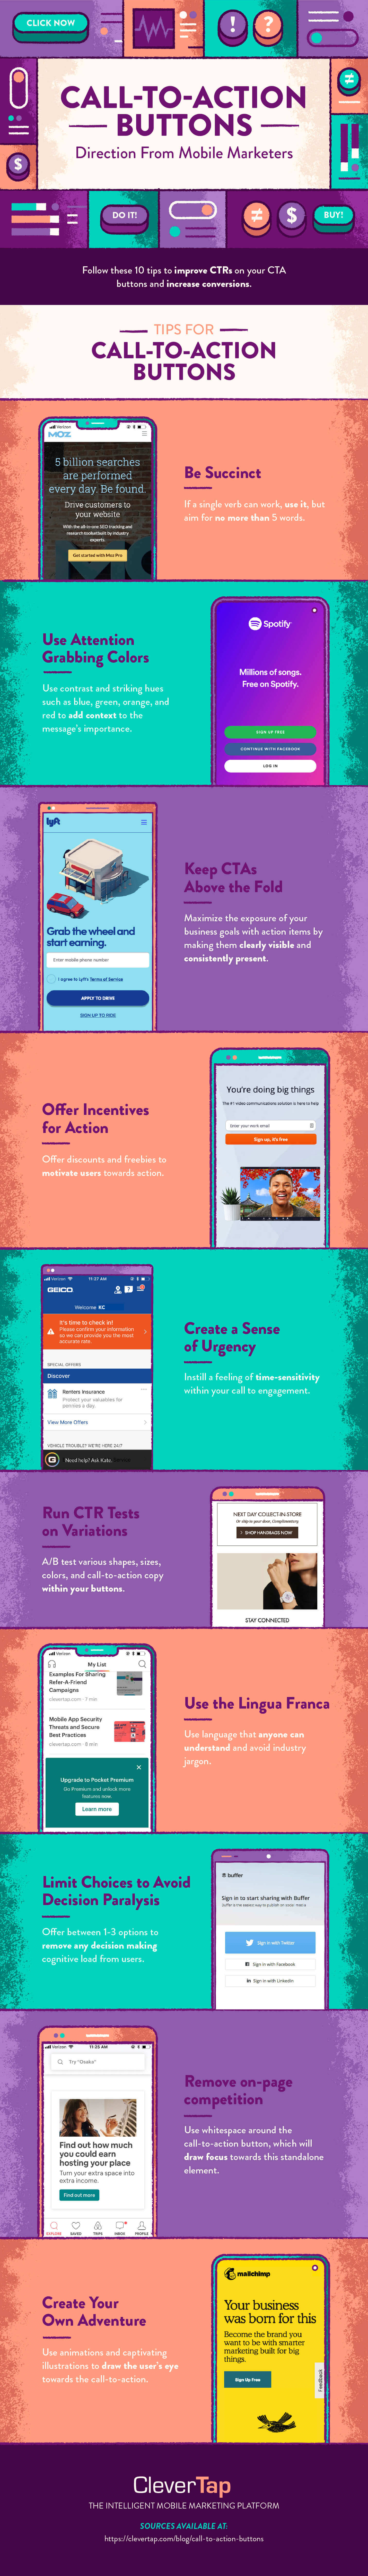 call to action button examples from real companies with tips